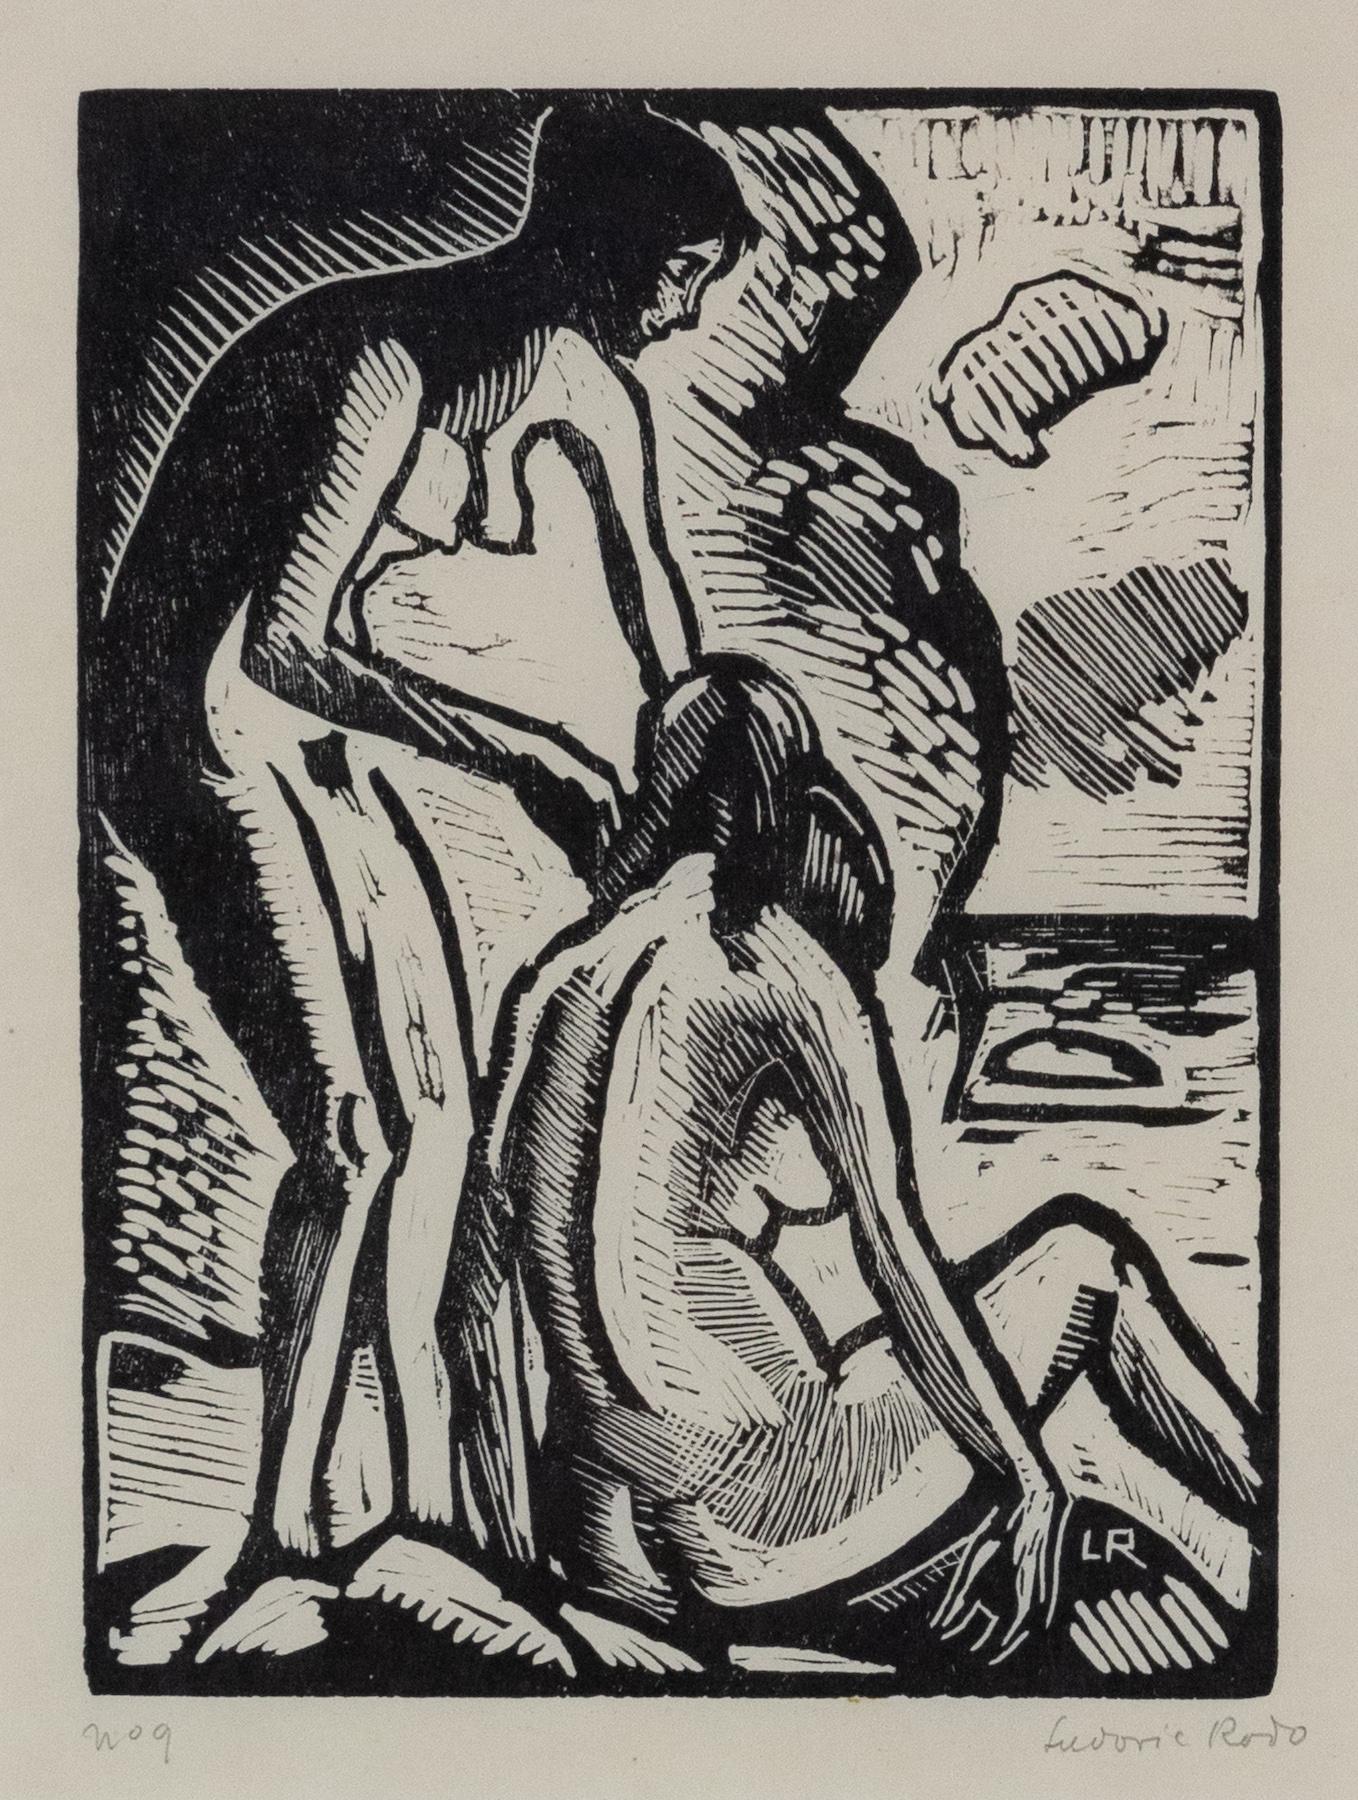 *UK BUYERS WILL PAY AN ADDITIONAL 20% VAT ON TOP OF THE ABOVE PRICE

Bathers by Ludovic-Rodo Pissarro (1878-1952)
Wood engraving
15.1 x 11.3 cm (6 x 4¹/₂ inches)
Initialled on the plate, signed lower right, Ludovic Rodo and numbered lower left,